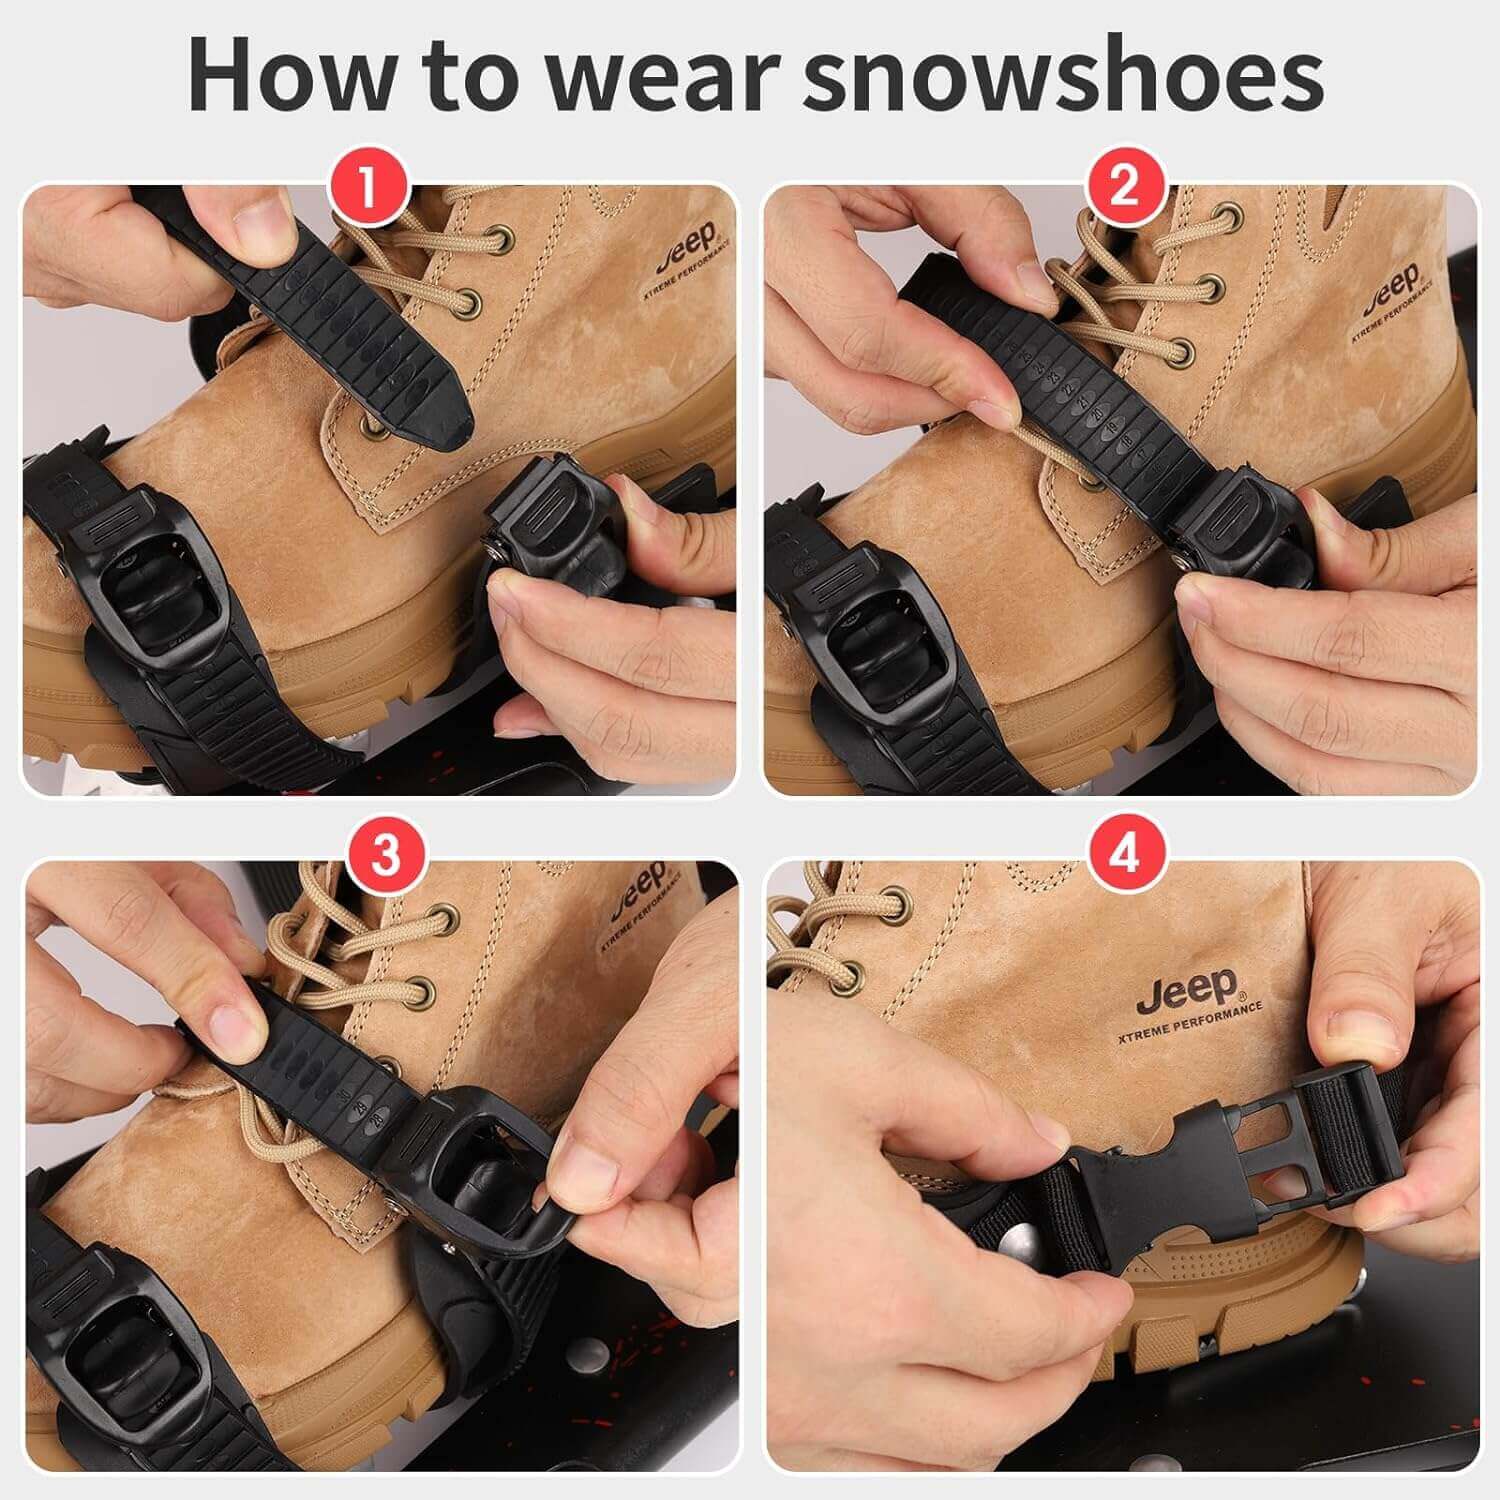 Shop The Latest >3 in 1 Light Weight Snowshoes Set with Trekking Poles > *Only $128.18*> From The Top Brand > *‎Carryownl* > Shop Now and Get Free Shipping On Orders Over $45.00 >*Shop Earth Foot*